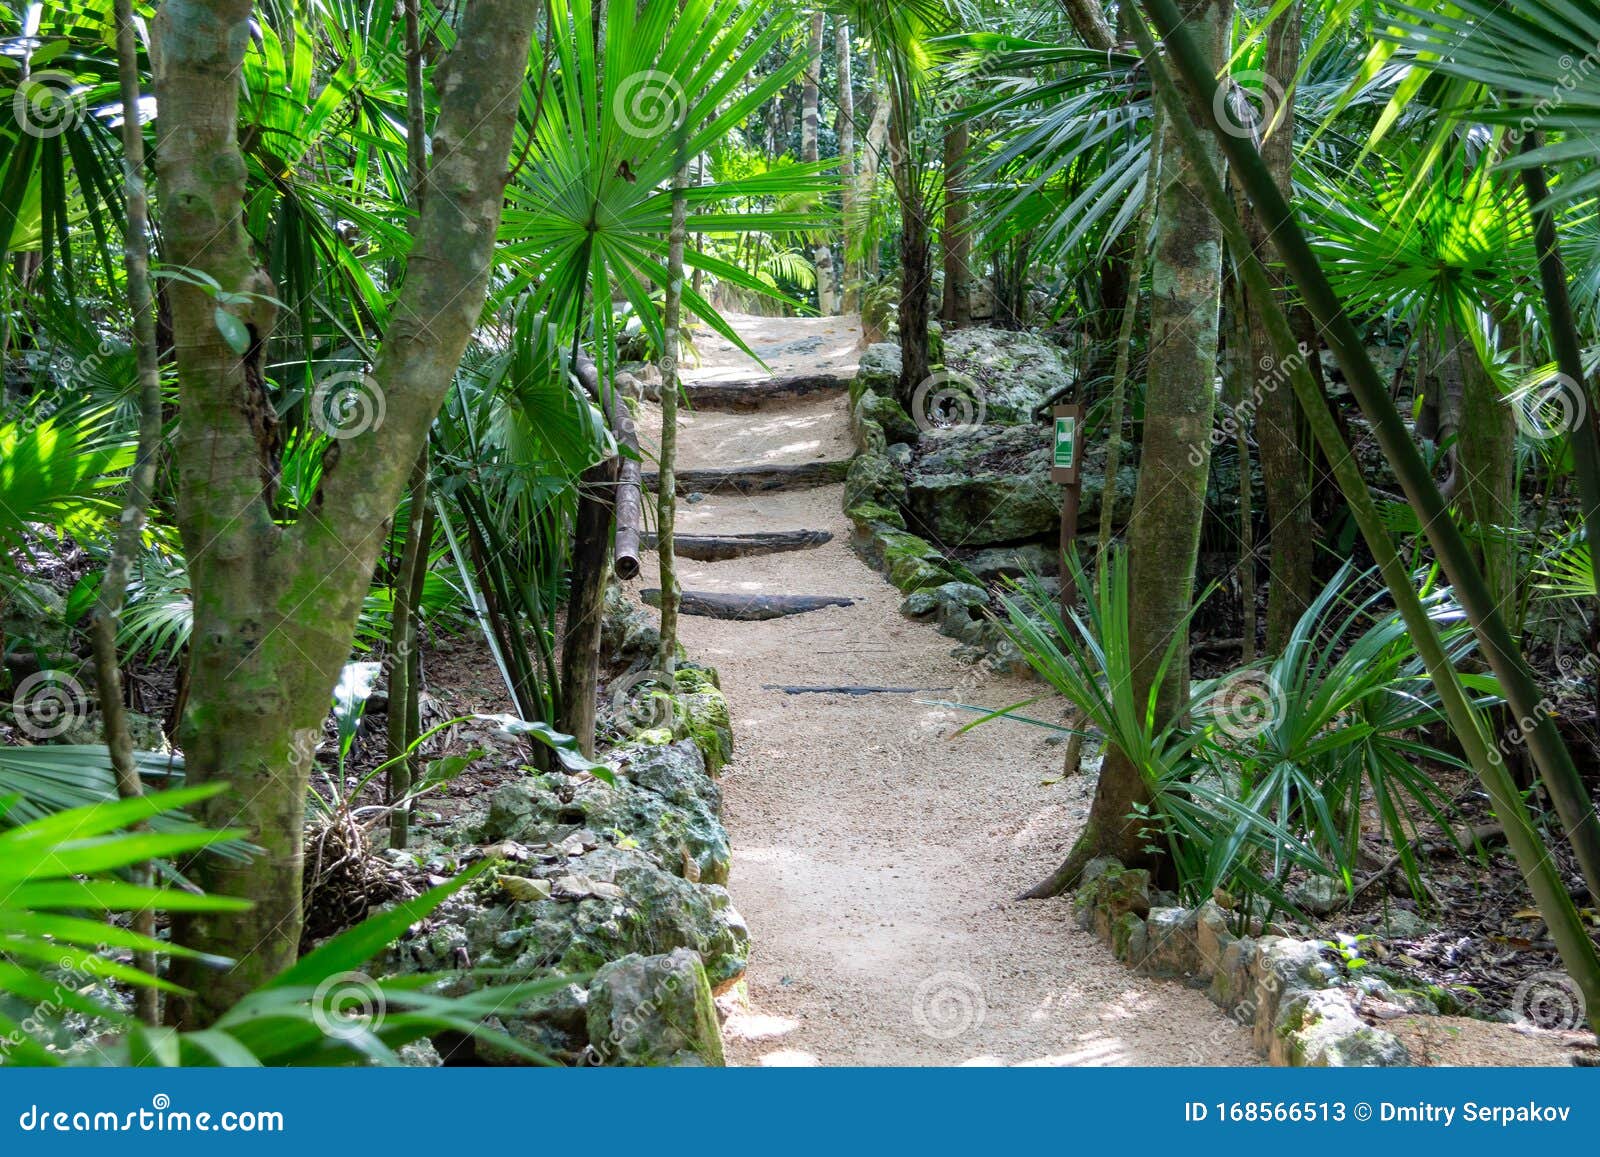 Footpath In A Tropical Jungle Stock Image Image Of Adventure People